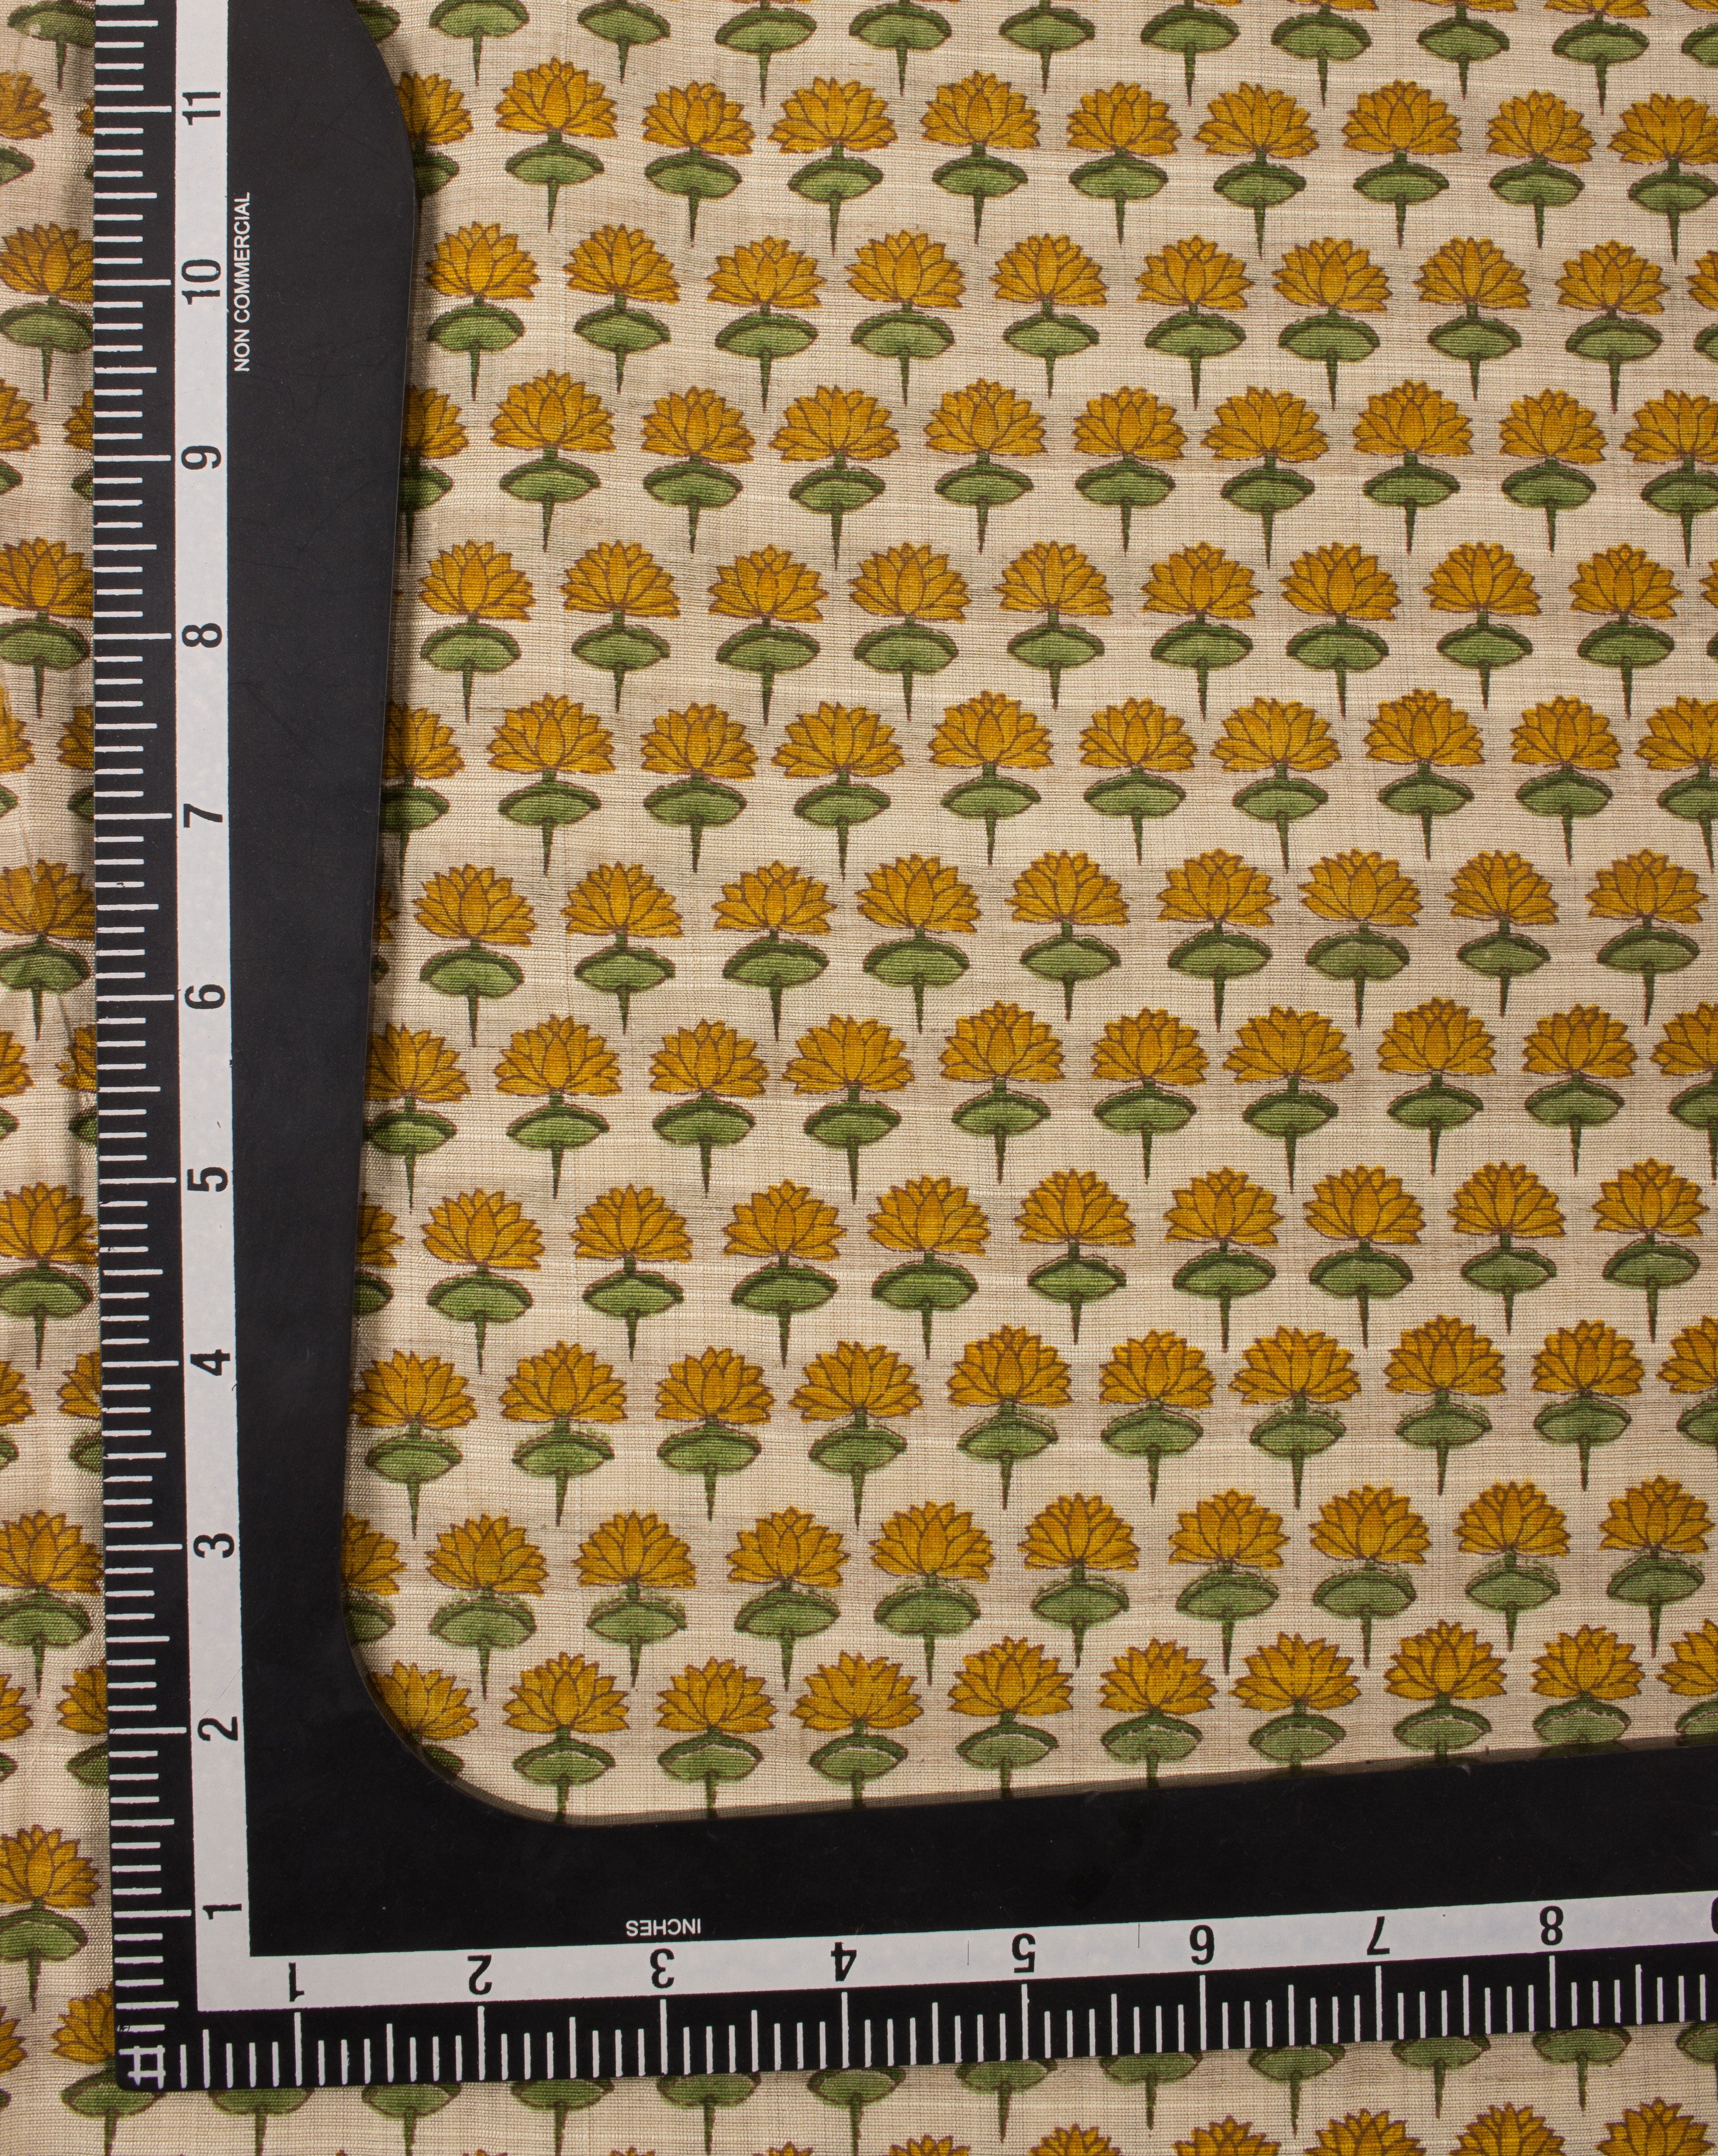 Off-White Yellow Floral Pattern Screen Print Chanderi Fabric ( Width 48 Inch ) - Fabriclore.com